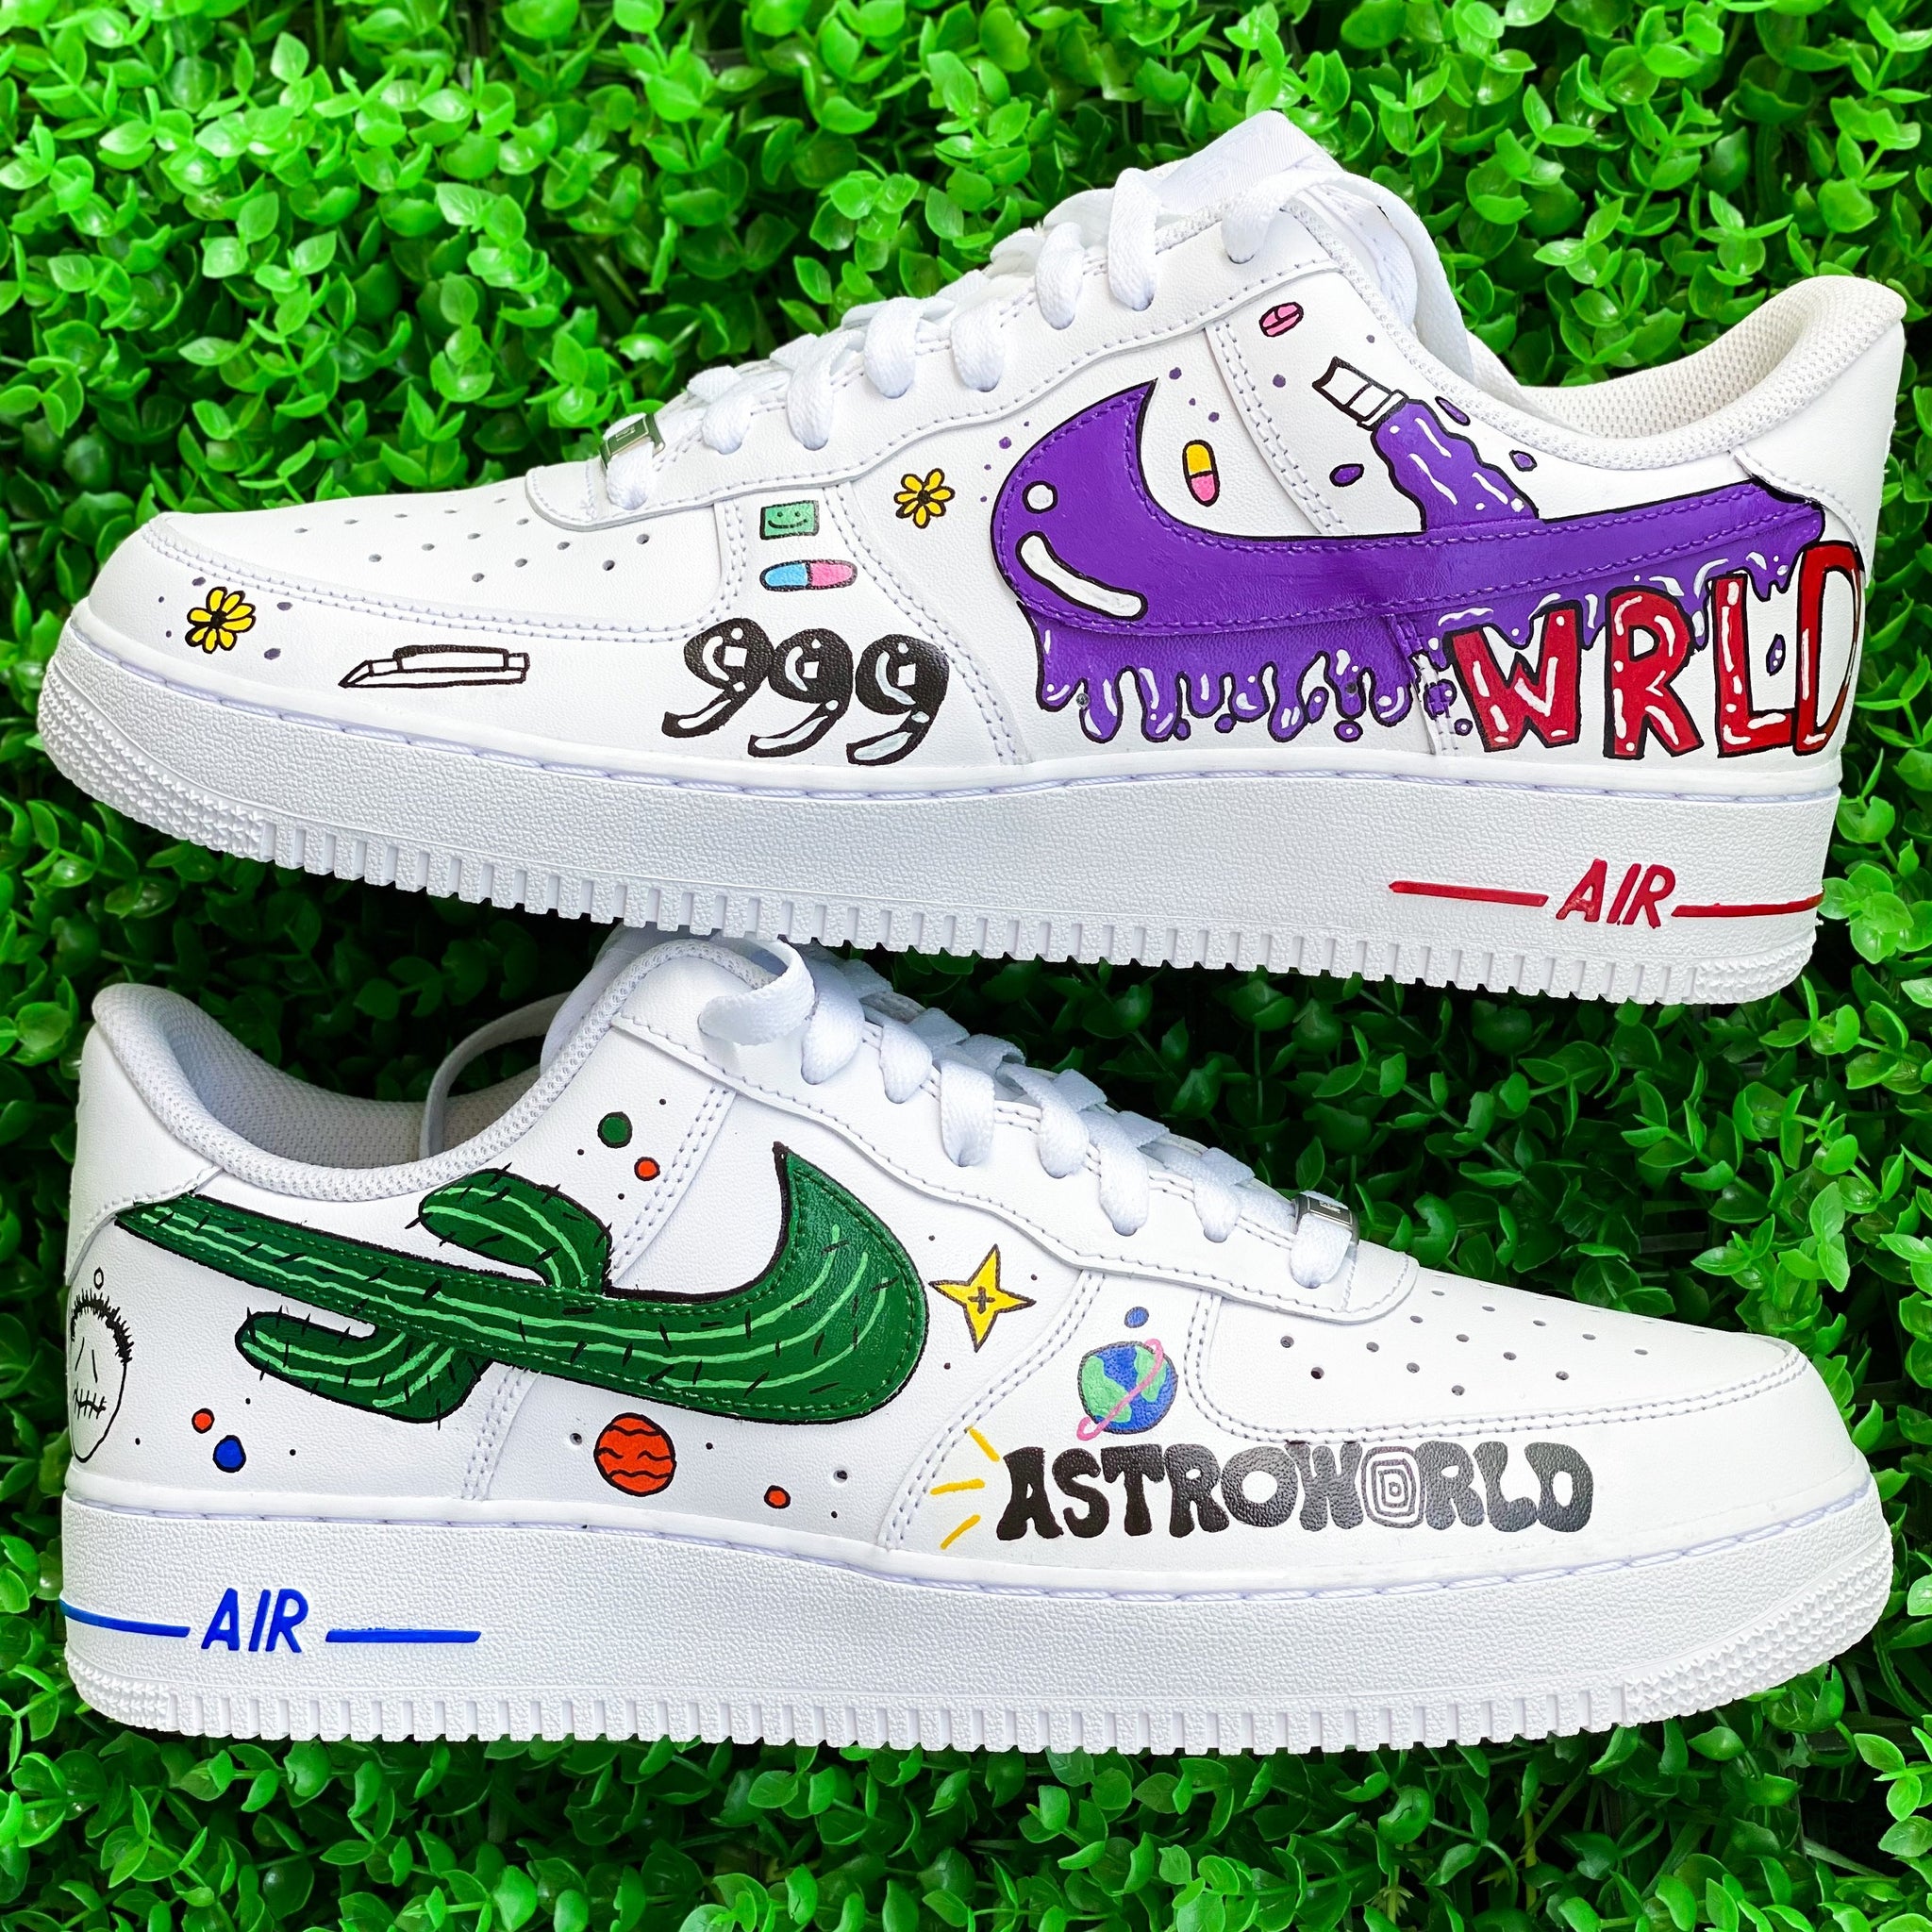 astroworld airforces